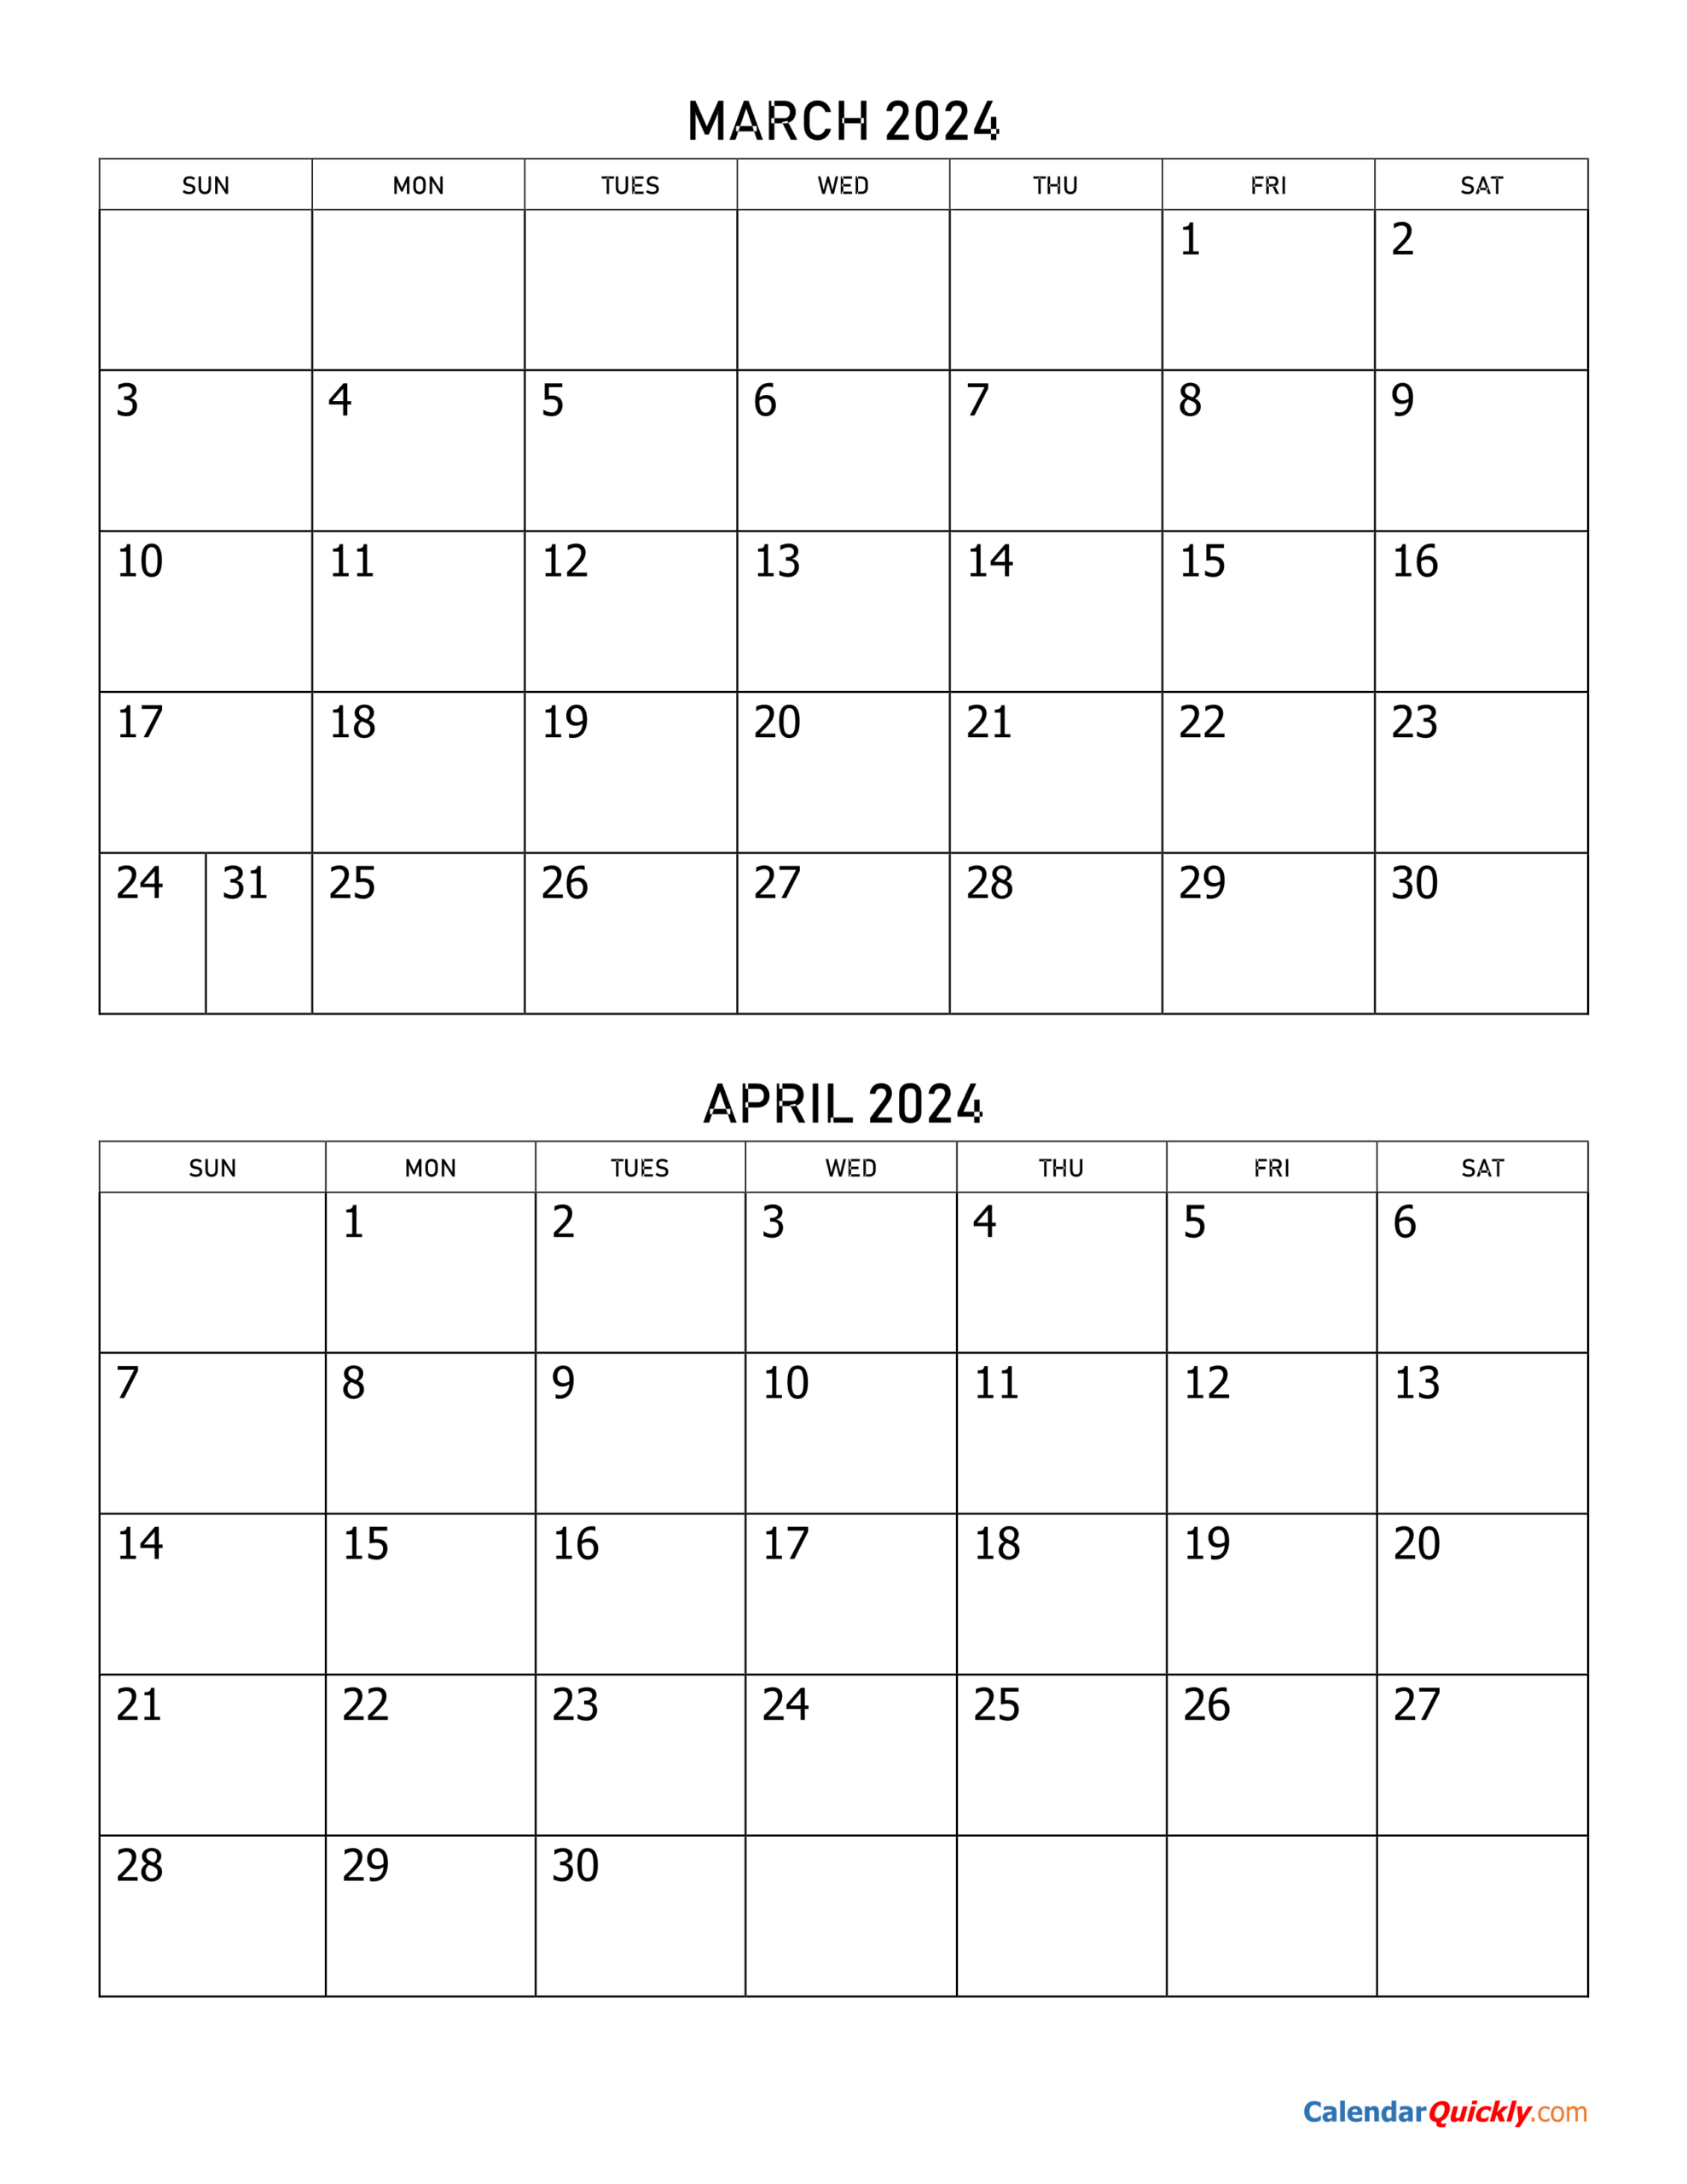 March And April 2024 Calendar | Calendar Quickly with Free Printable Calendar April 2024 To March 2024